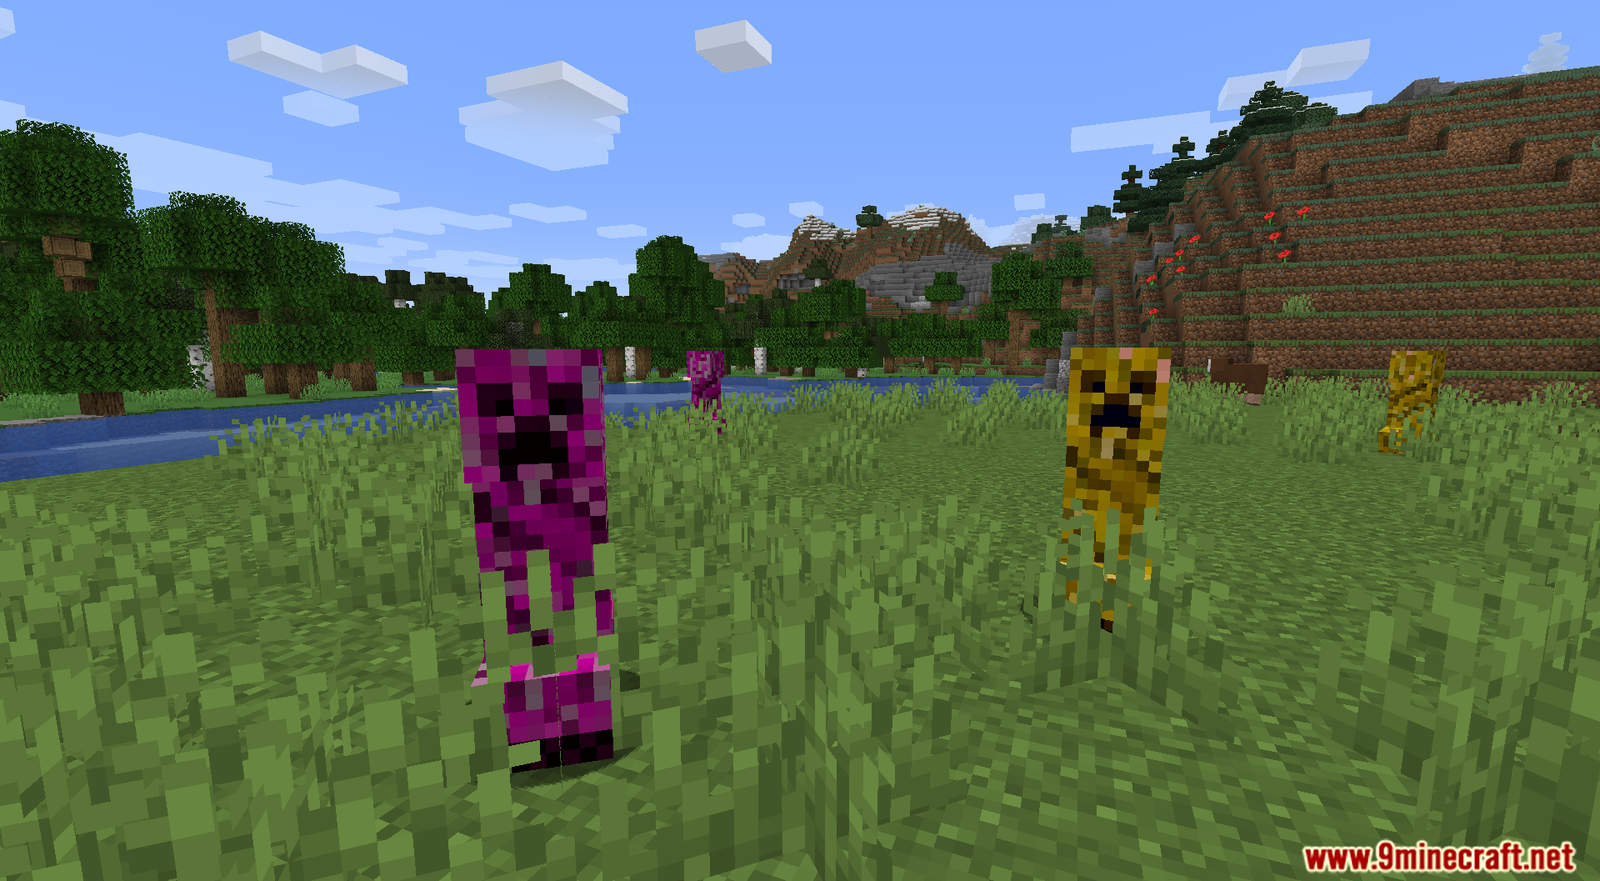 Crazy Creepers mod for Minecraft (12)